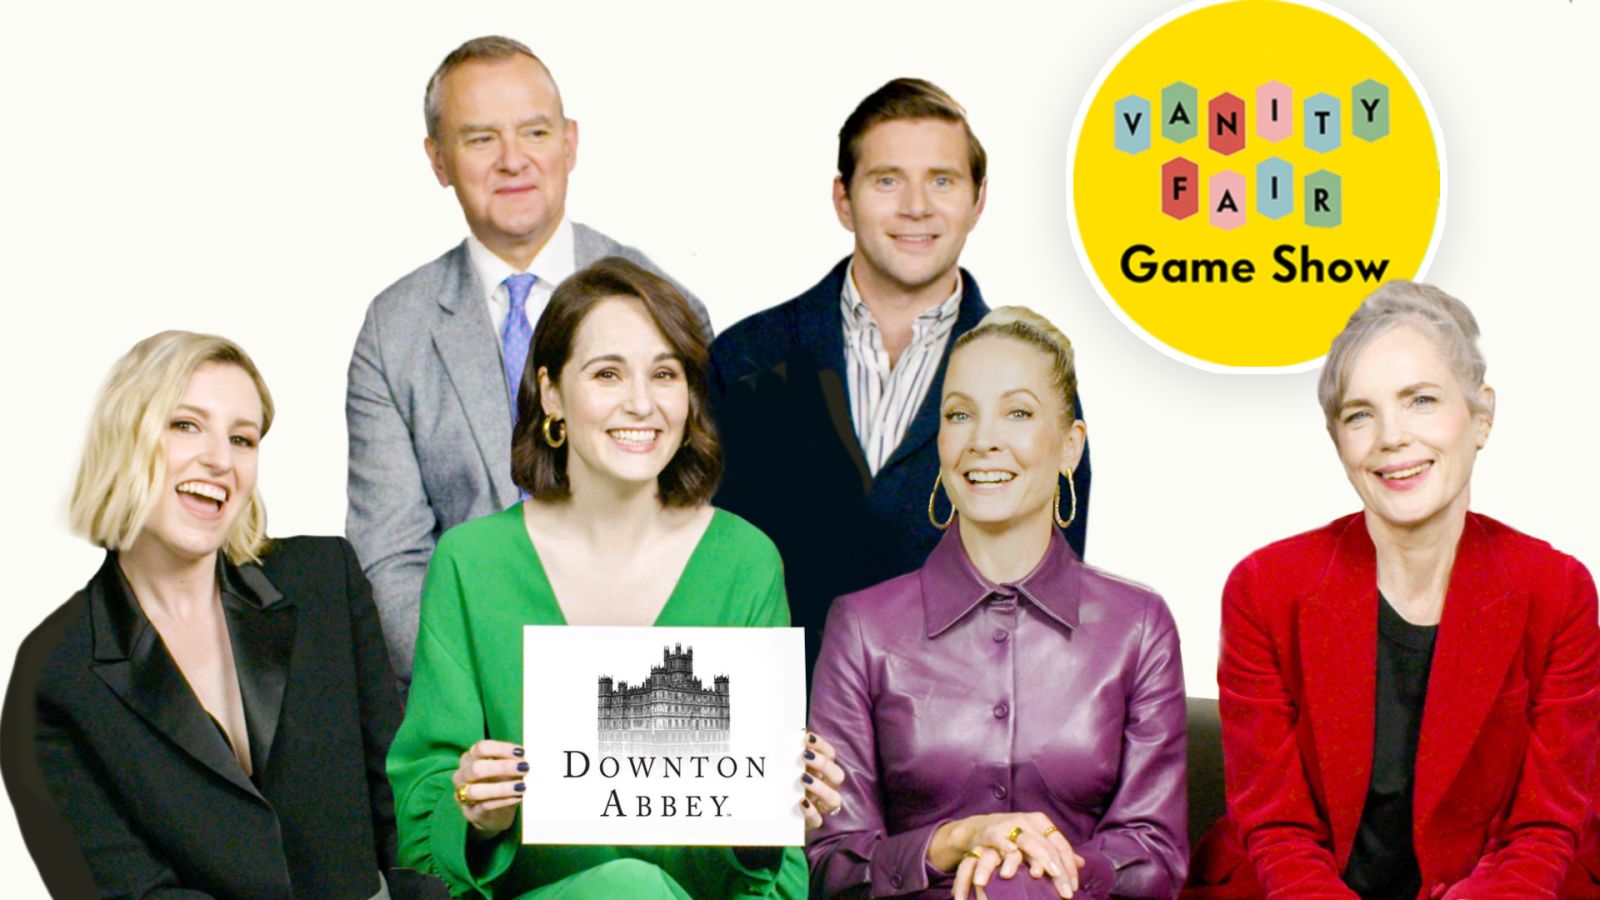 How Well Does the Downton Abbey Cast Know Each Other?